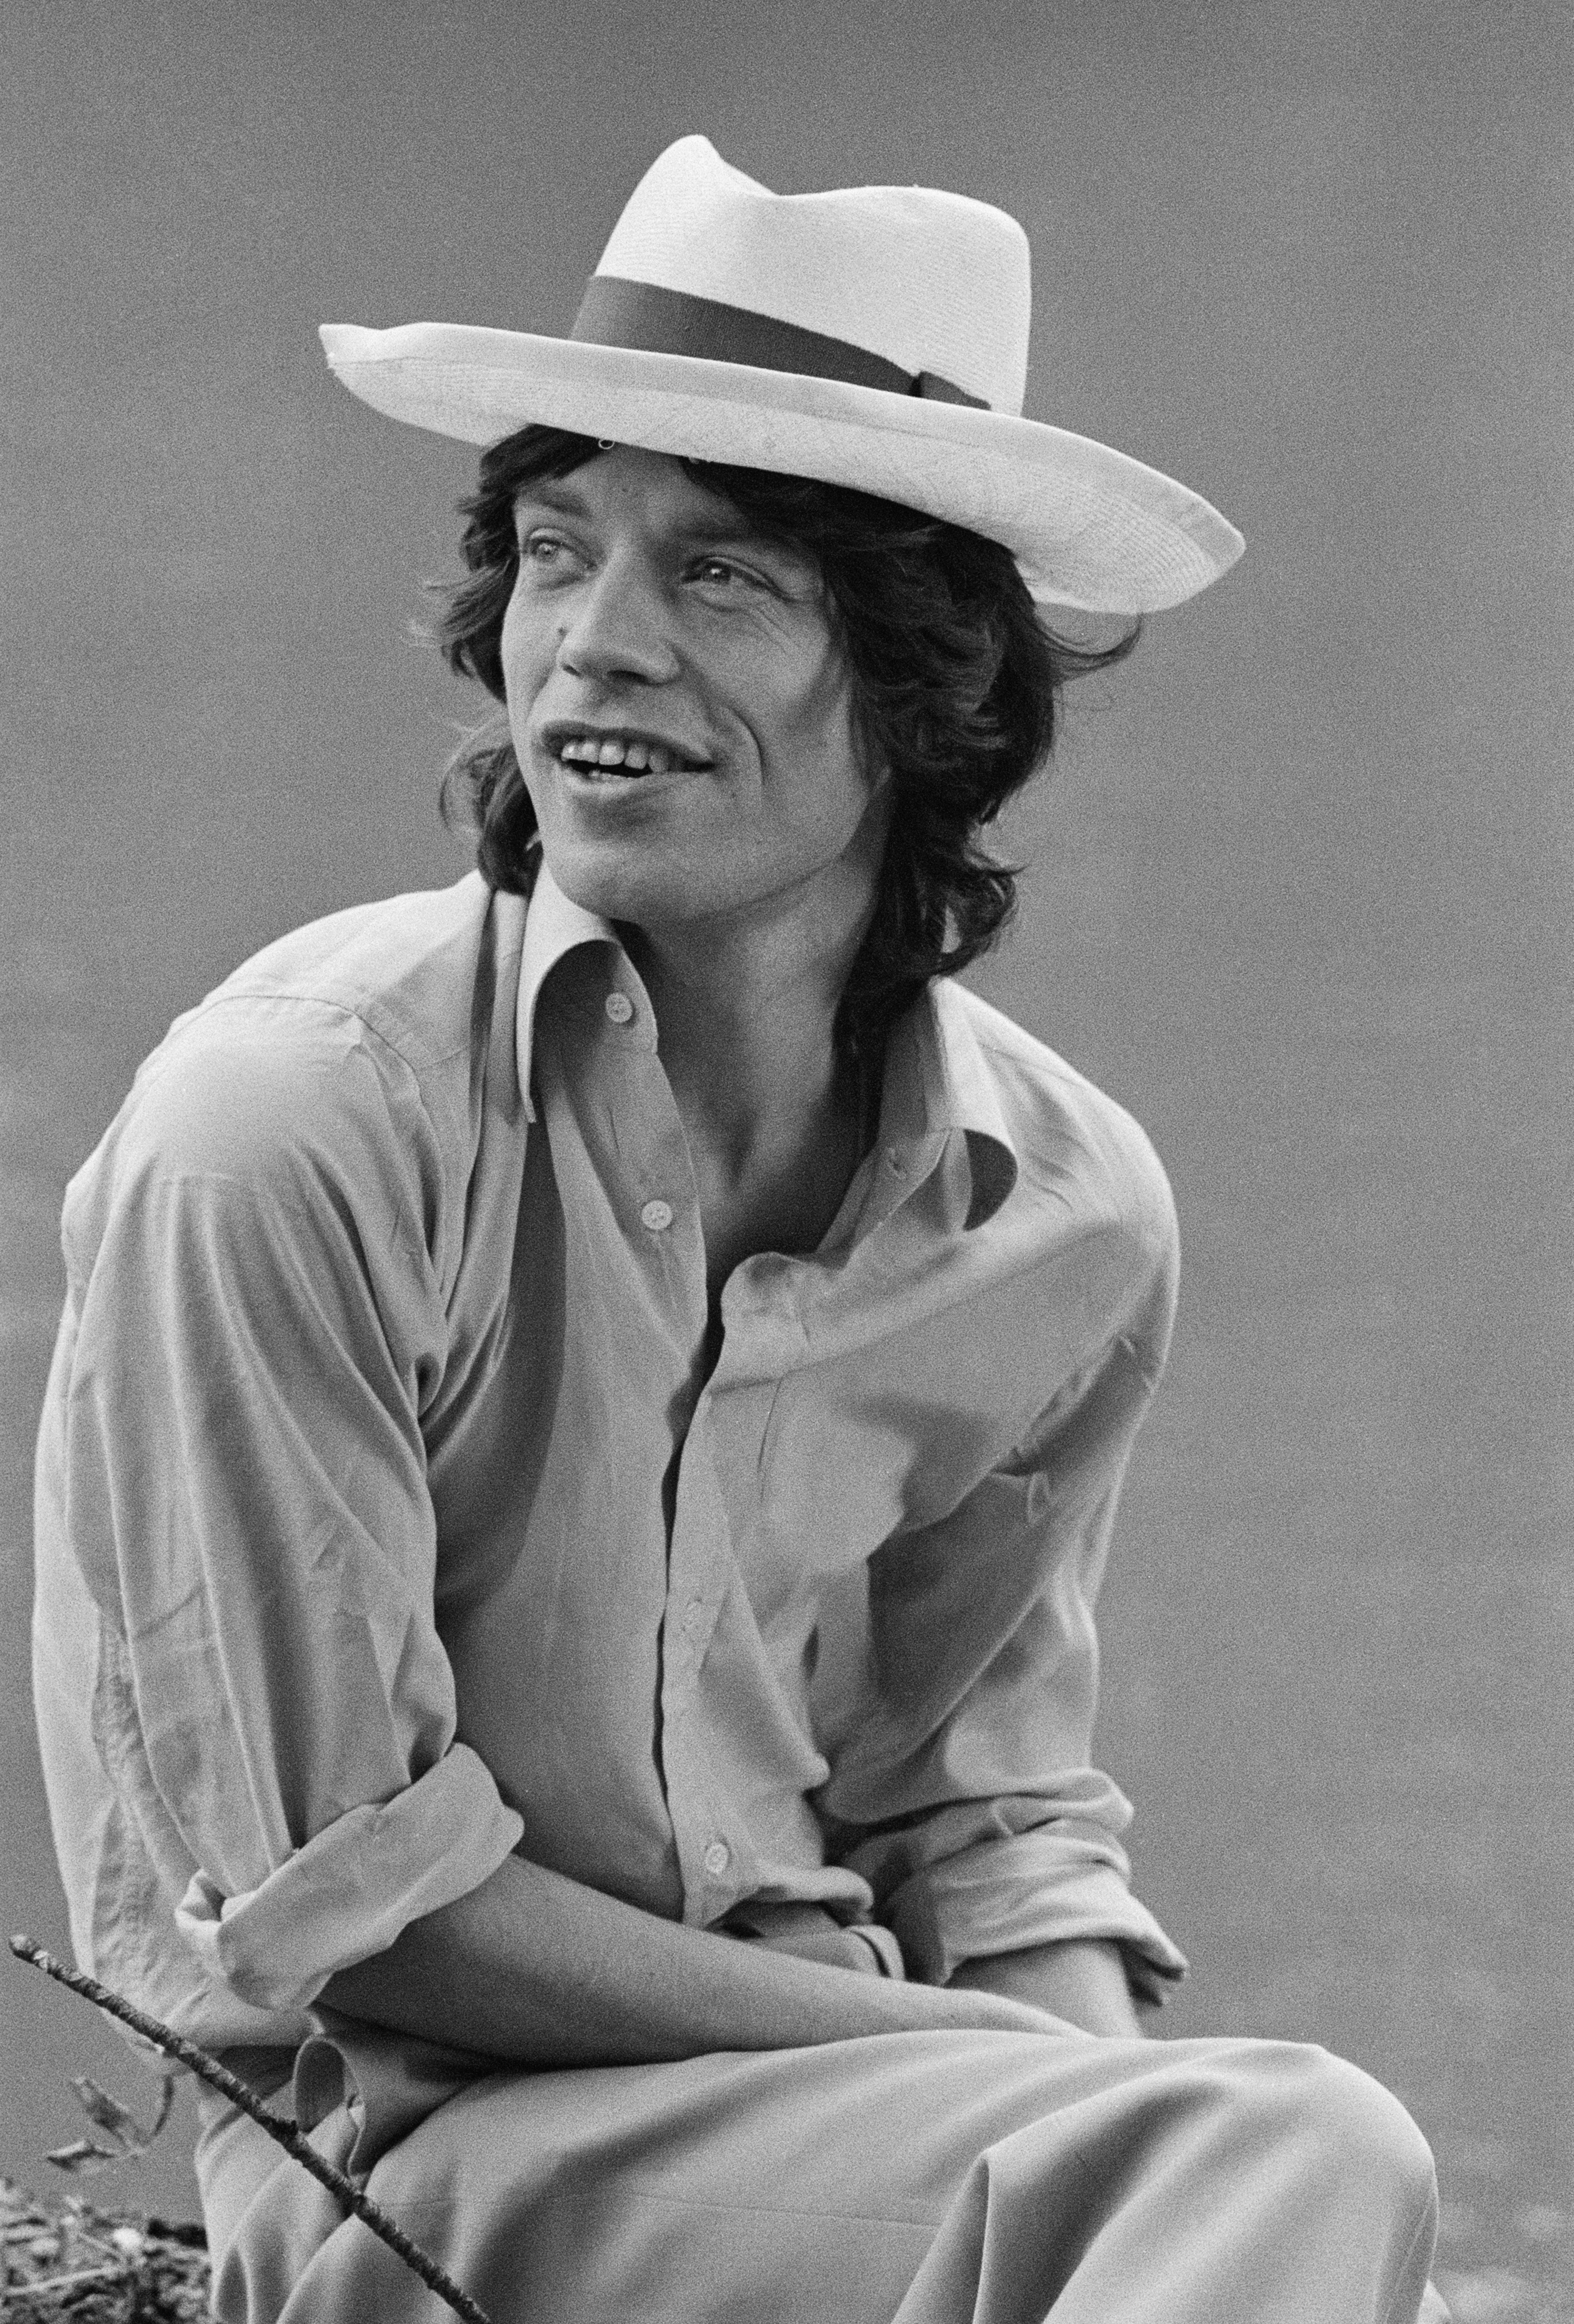 Singer Mick Jagger before the first night of the Rolling Stones' 1973 European World Tour on September 1, 1973. | Source: Getty Images